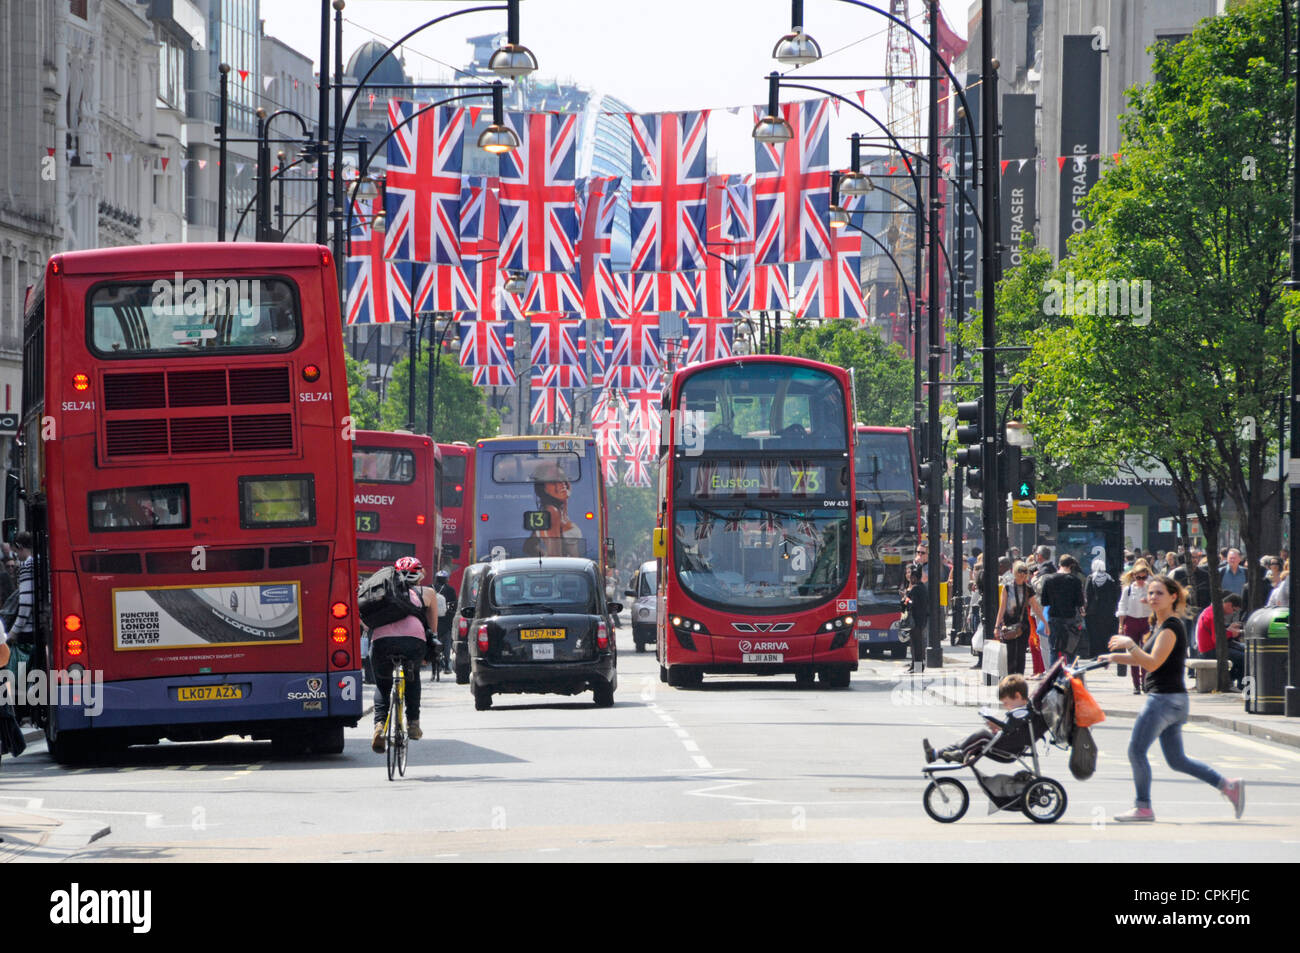 Bus taxi & bike traffic in Oxford Street London West End England UK  Union Jacks for 2012 Olympic games & mother crossing road child in pushchair pram Stock Photo